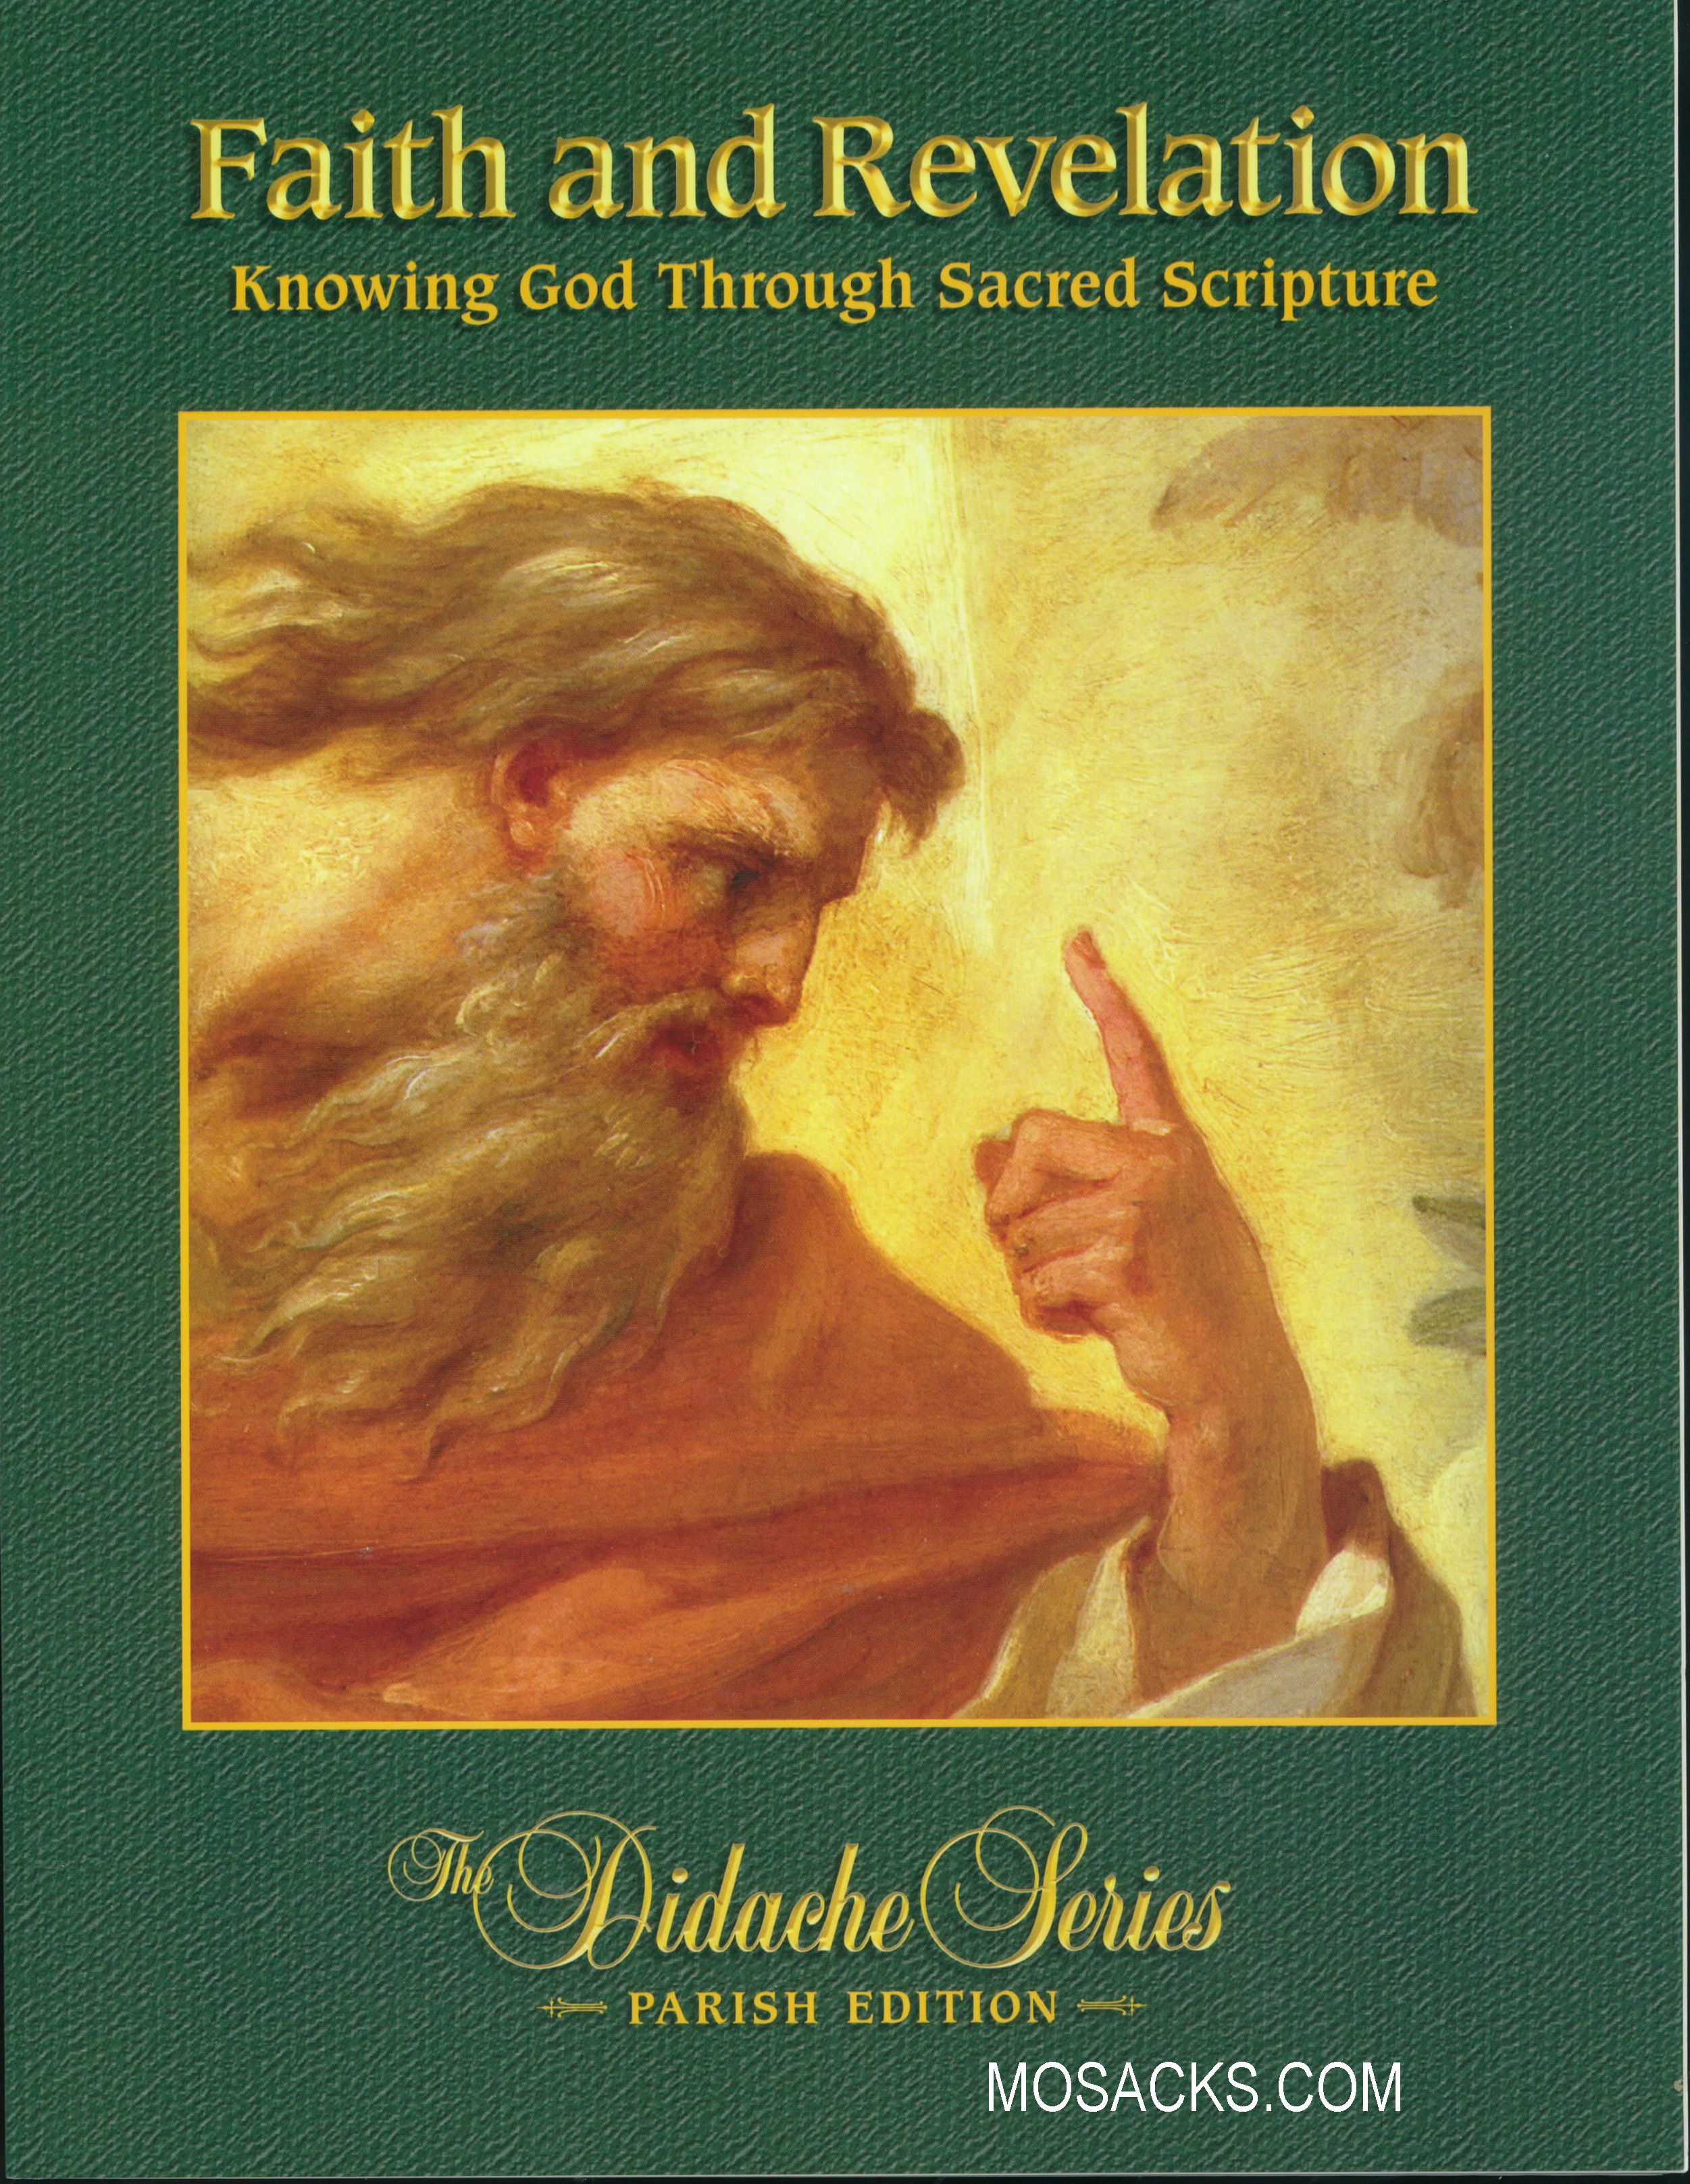 Faith and Revelation: Knowing God Through Sacred Scripture by Dr. Scott Hahn 445-45808